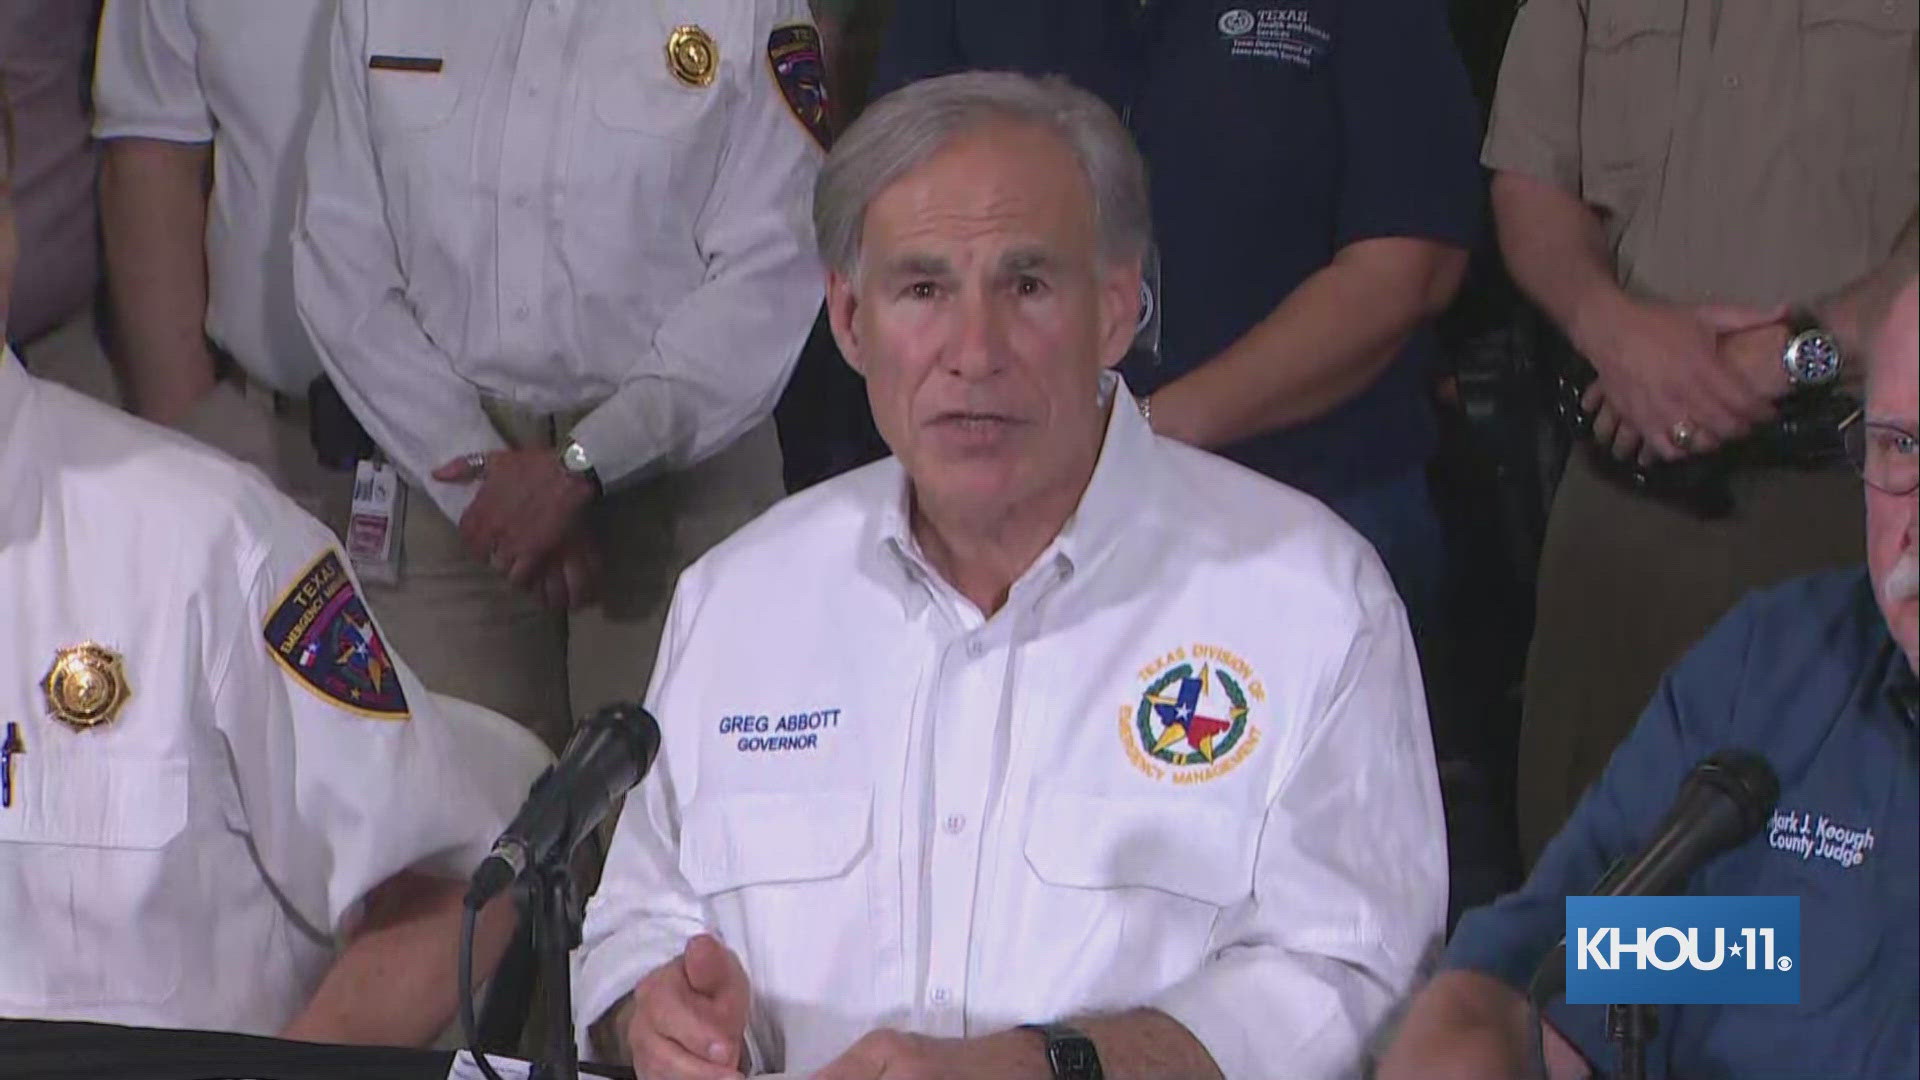 The governor was in Conroe on Monday to assess the damage from flooding around the Houston area.